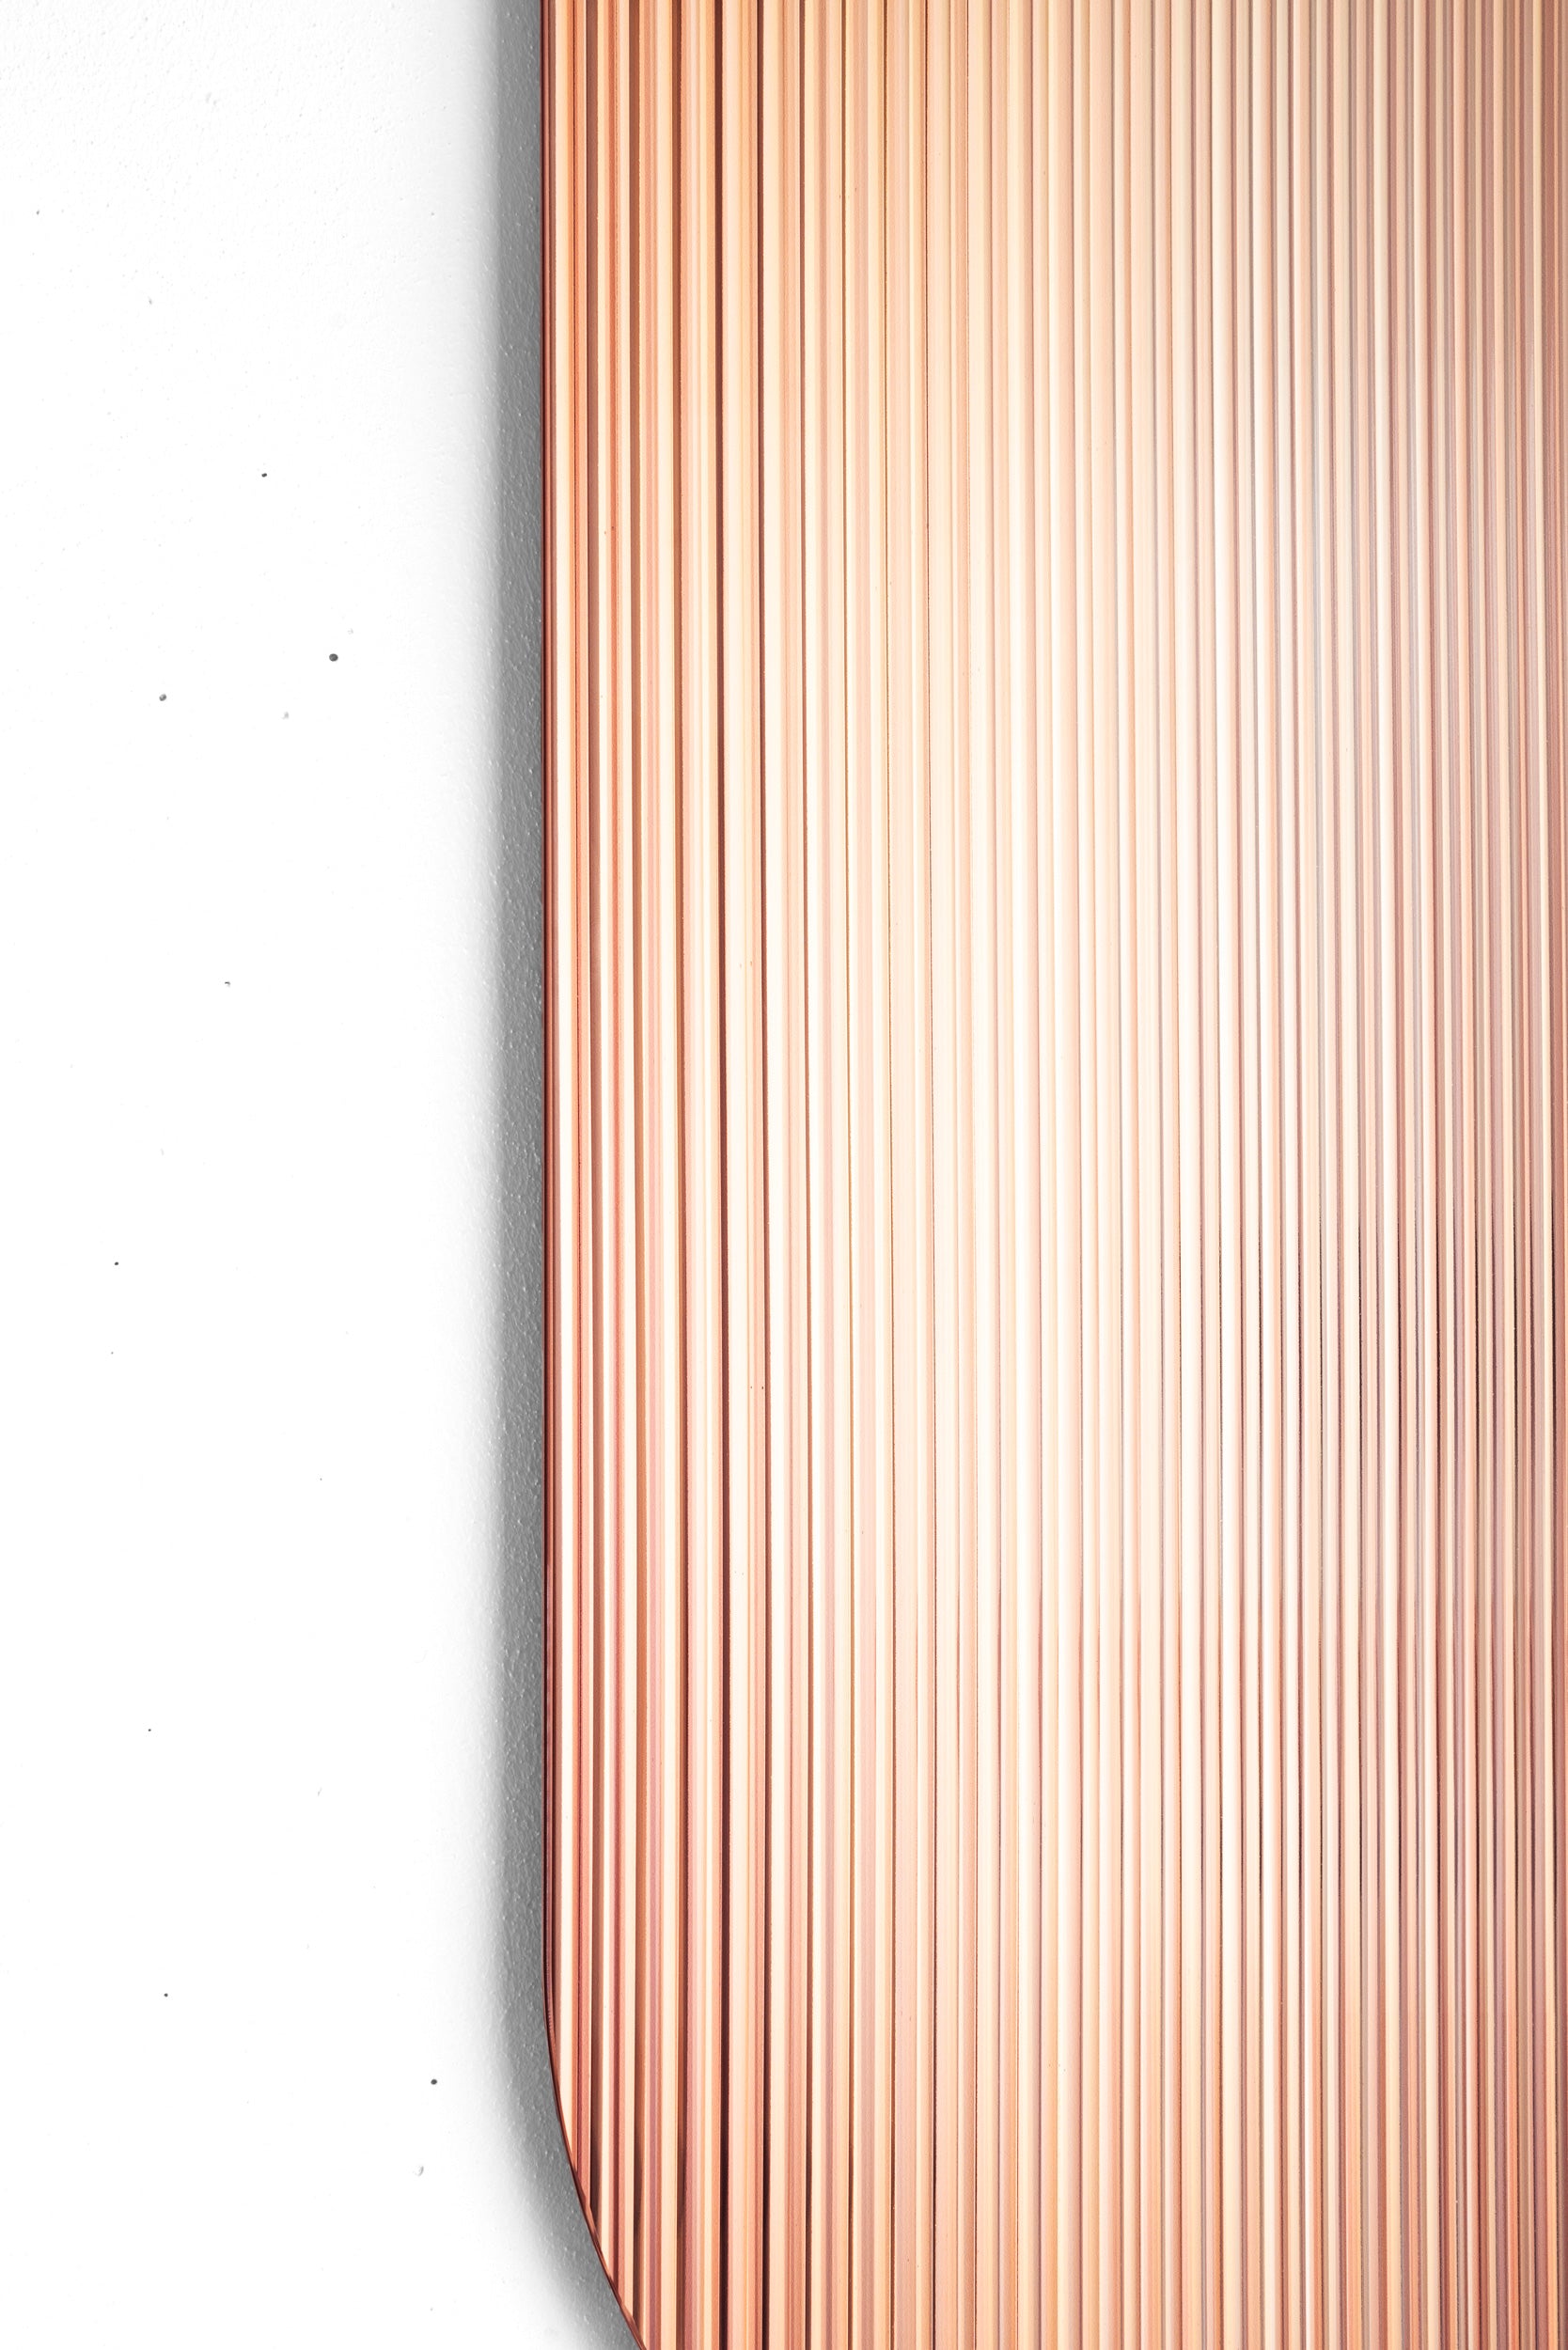 20221128_RR_Photography_Editions_Metal-Shift-Panel_Copper_detail_lowres_R02.jpg